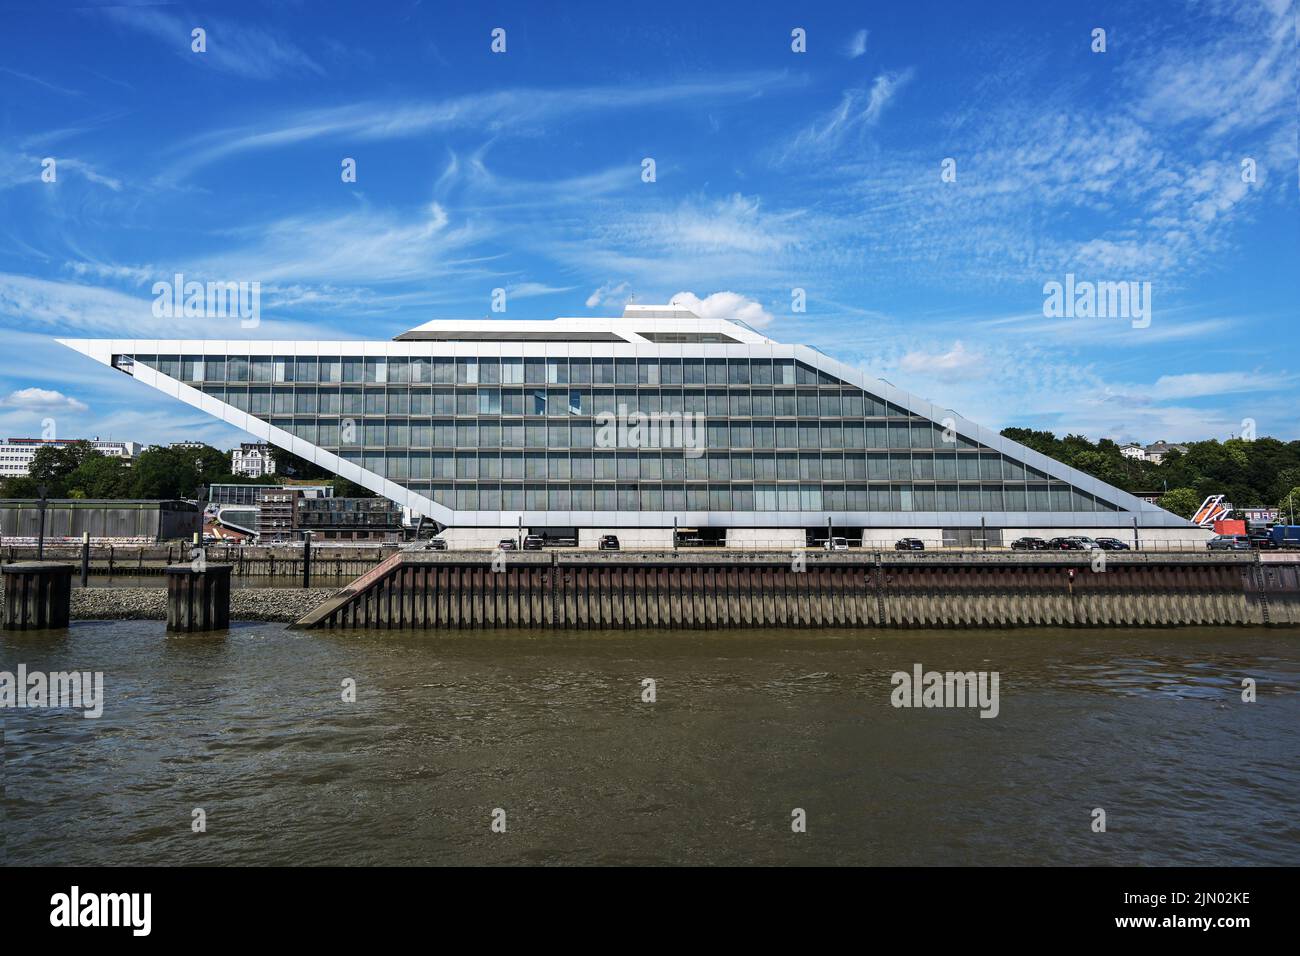 Dockland Hamburg, Germany, modern office building in the shape of a parallelogram, famous landmark and popular viewing platform, blue sky with clouds, Stock Photo